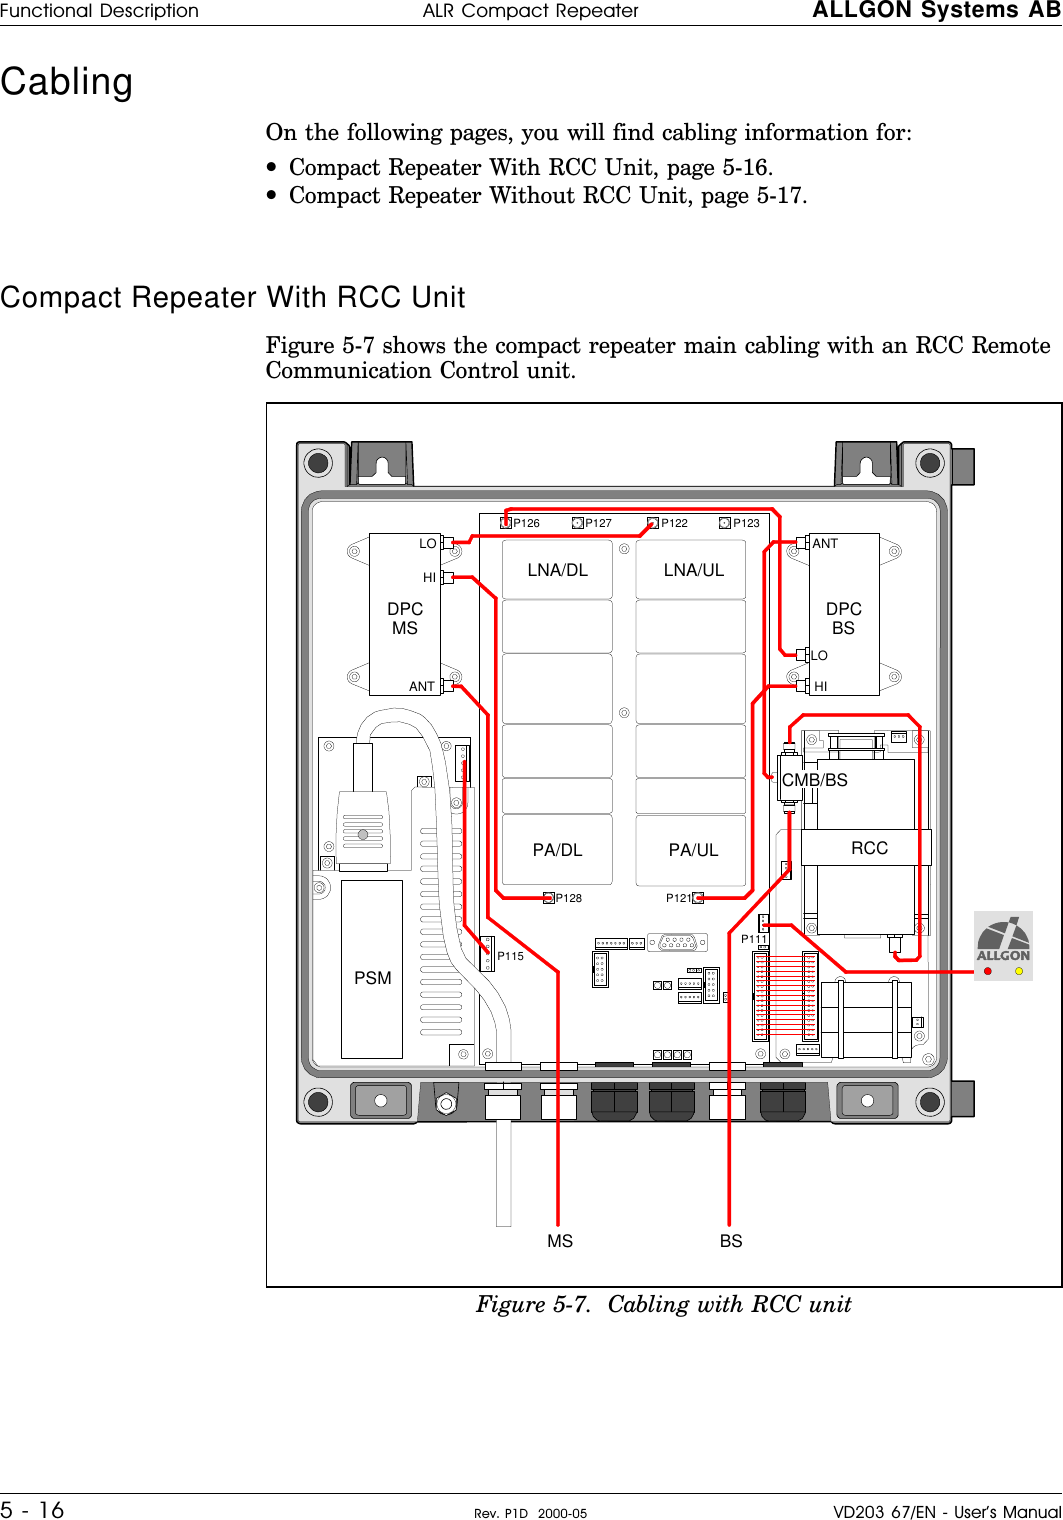 Cabling On the following pages, you will find cabling information for:•Compact Repeater With RCC Unit, page 5-16.•Compact Repeater Without RCC Unit, page 5-17.Compact Repeater With RCC Unit   Figure 5-7 shows the compact repeater main cabling with an RCC RemoteCommunication Control unit.ANTHILOANTLOHIP126 P127 P122 P123P121P128P111P115DPCMSLNA/ULLNA/DLPA/ULPA/DLPSMCMB/BSRCCDPCBSMS BSFigure 5-7.  Cabling with RCC unitFunctional Description ALR Compact Repeater ALLGON Systems AB5 - 16 Rev. P1D  2000-05 VD203 67/EN - User’s Manual